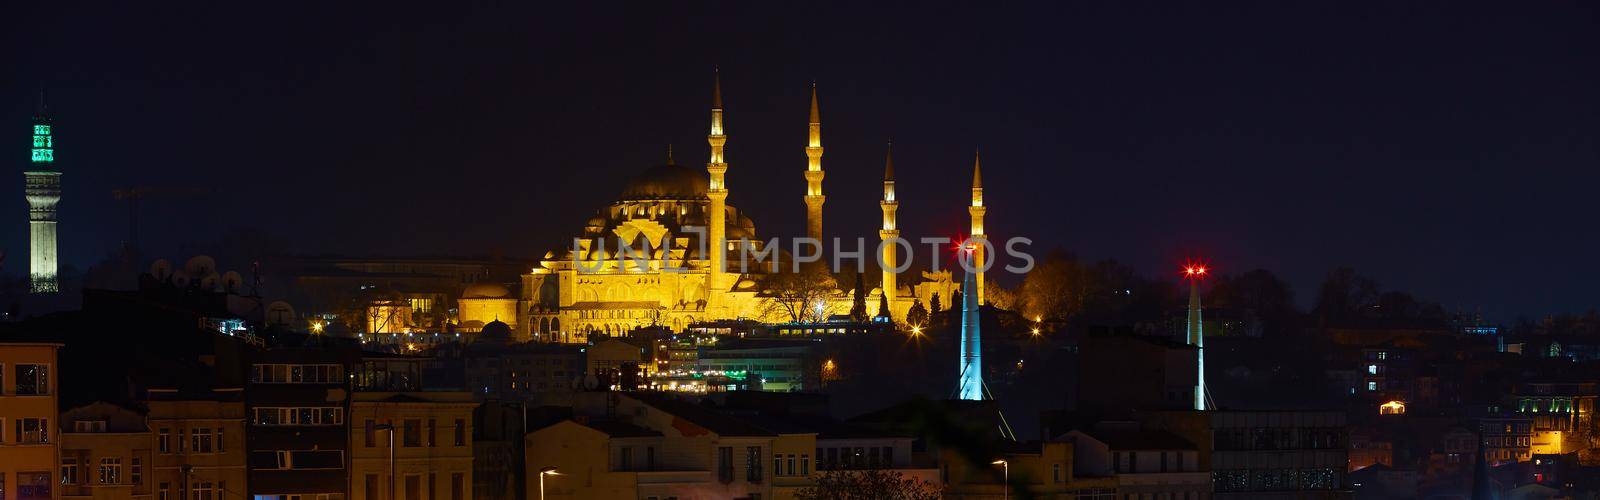 Suleymaniye Mosque night view, the largest in the city, Istanbul, Turkey.